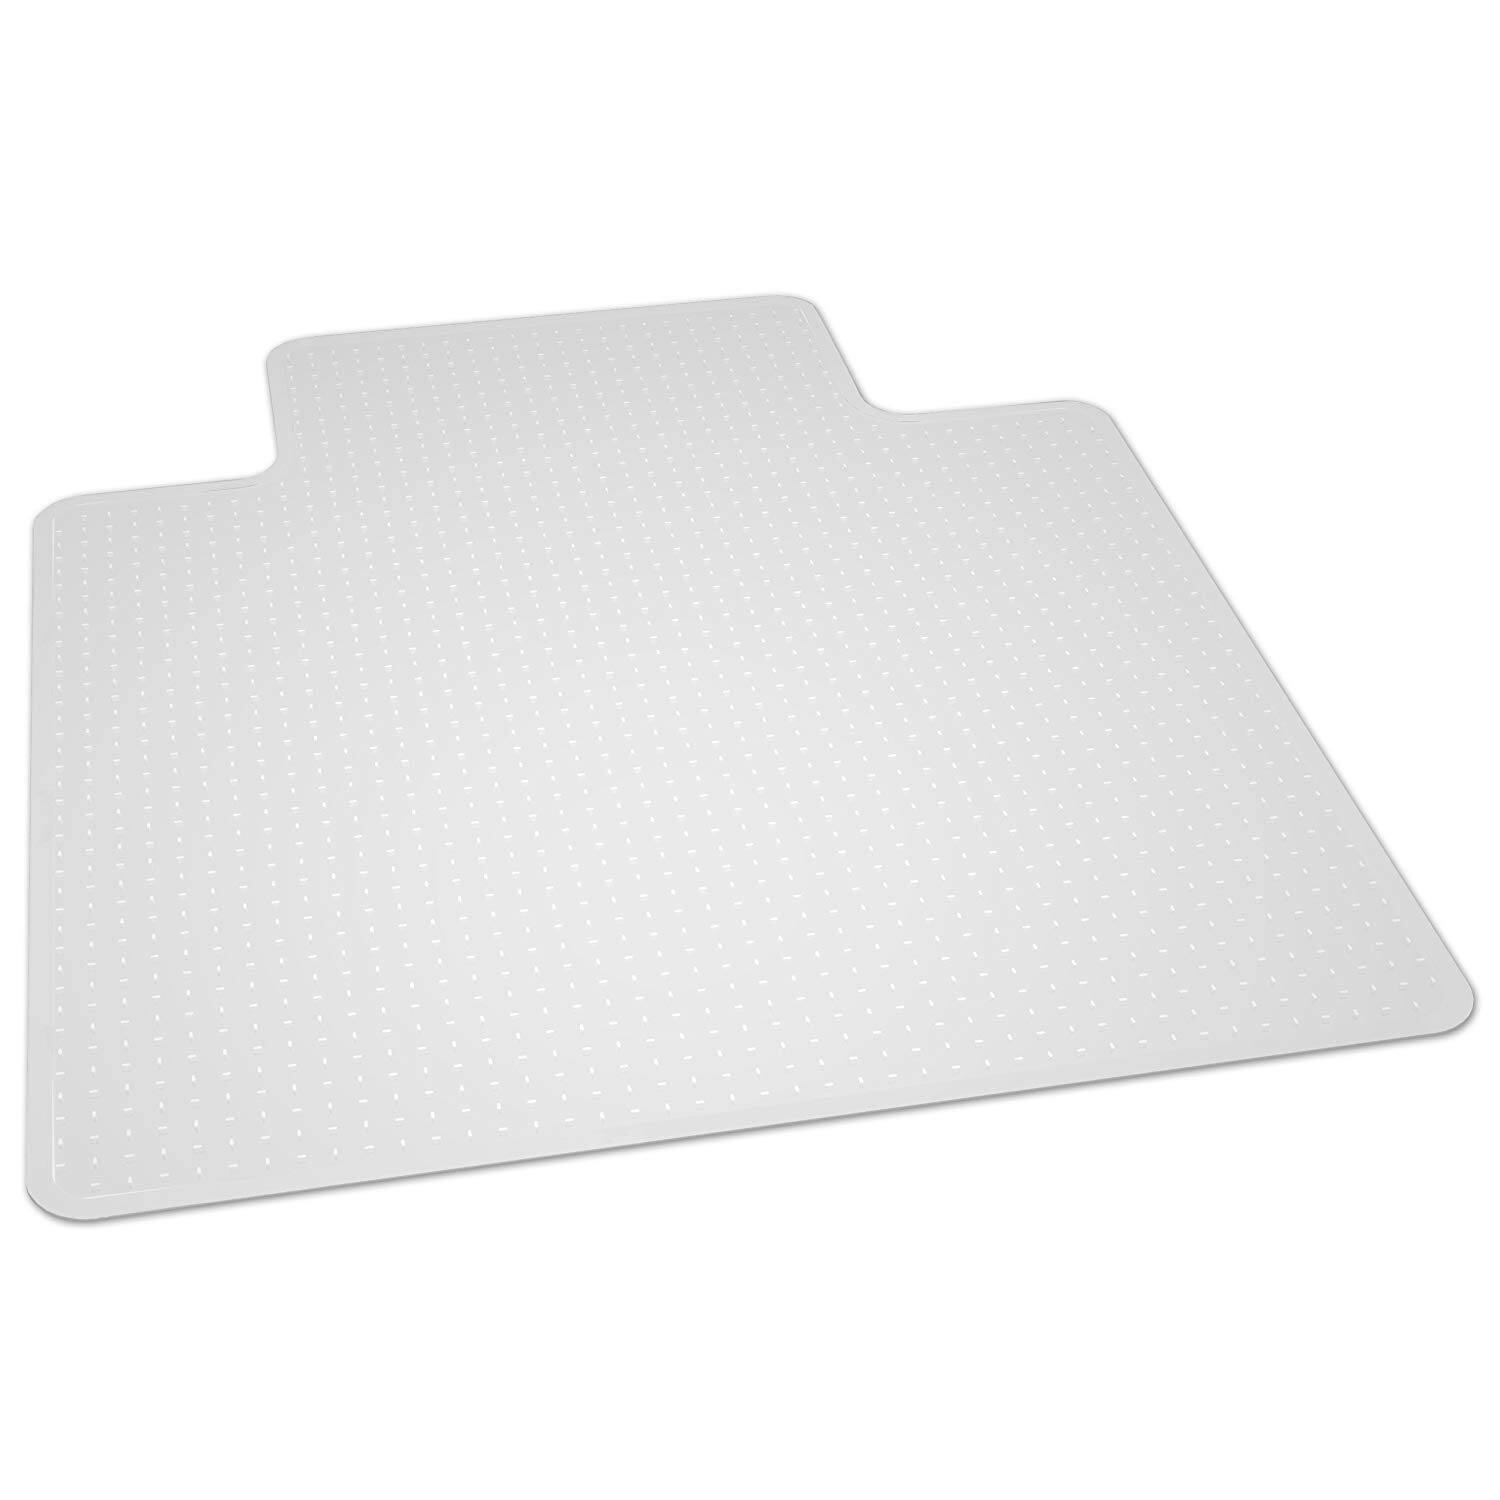 Transparent PVC Eco-friendly Material Soft Rubber Office Chair Mat Pads by Direct Wicker